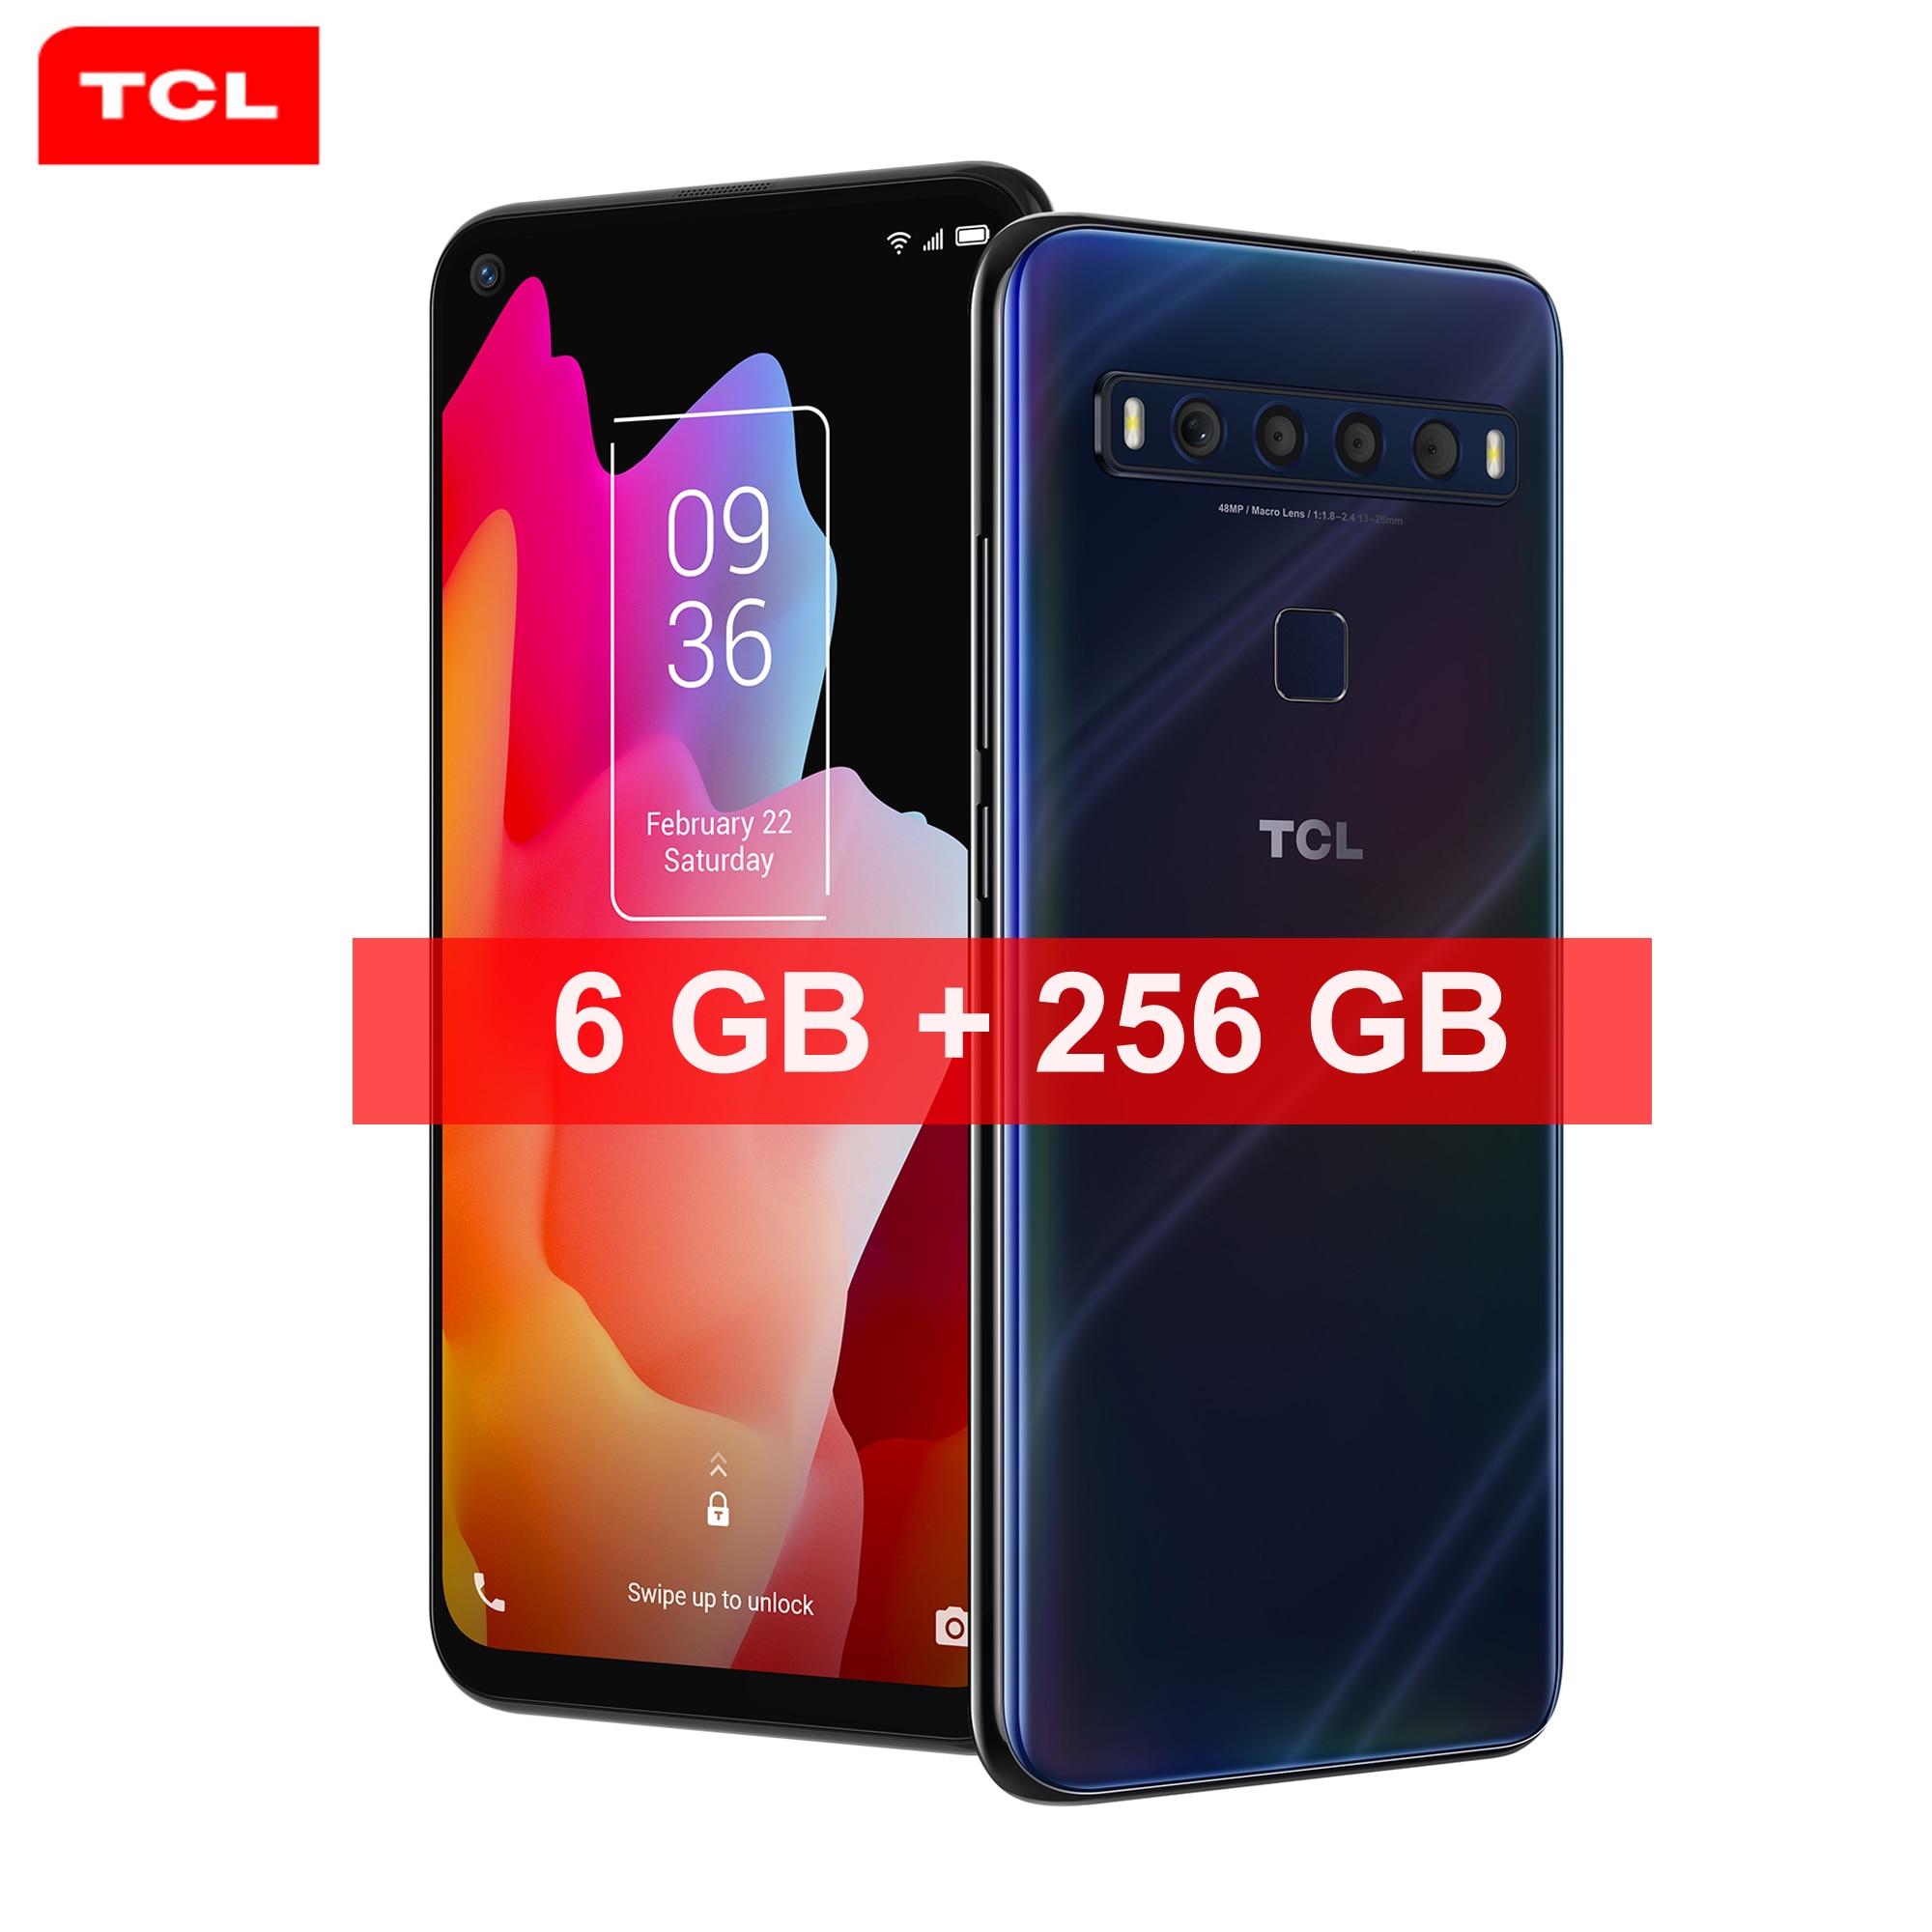 2021 TCL 10 Pro Smartphone Android 11.0 Full Screen 6GB RAM 256GB ROM 4G FDD LTE WiFi 4000mAh Battery Type C Game Phone